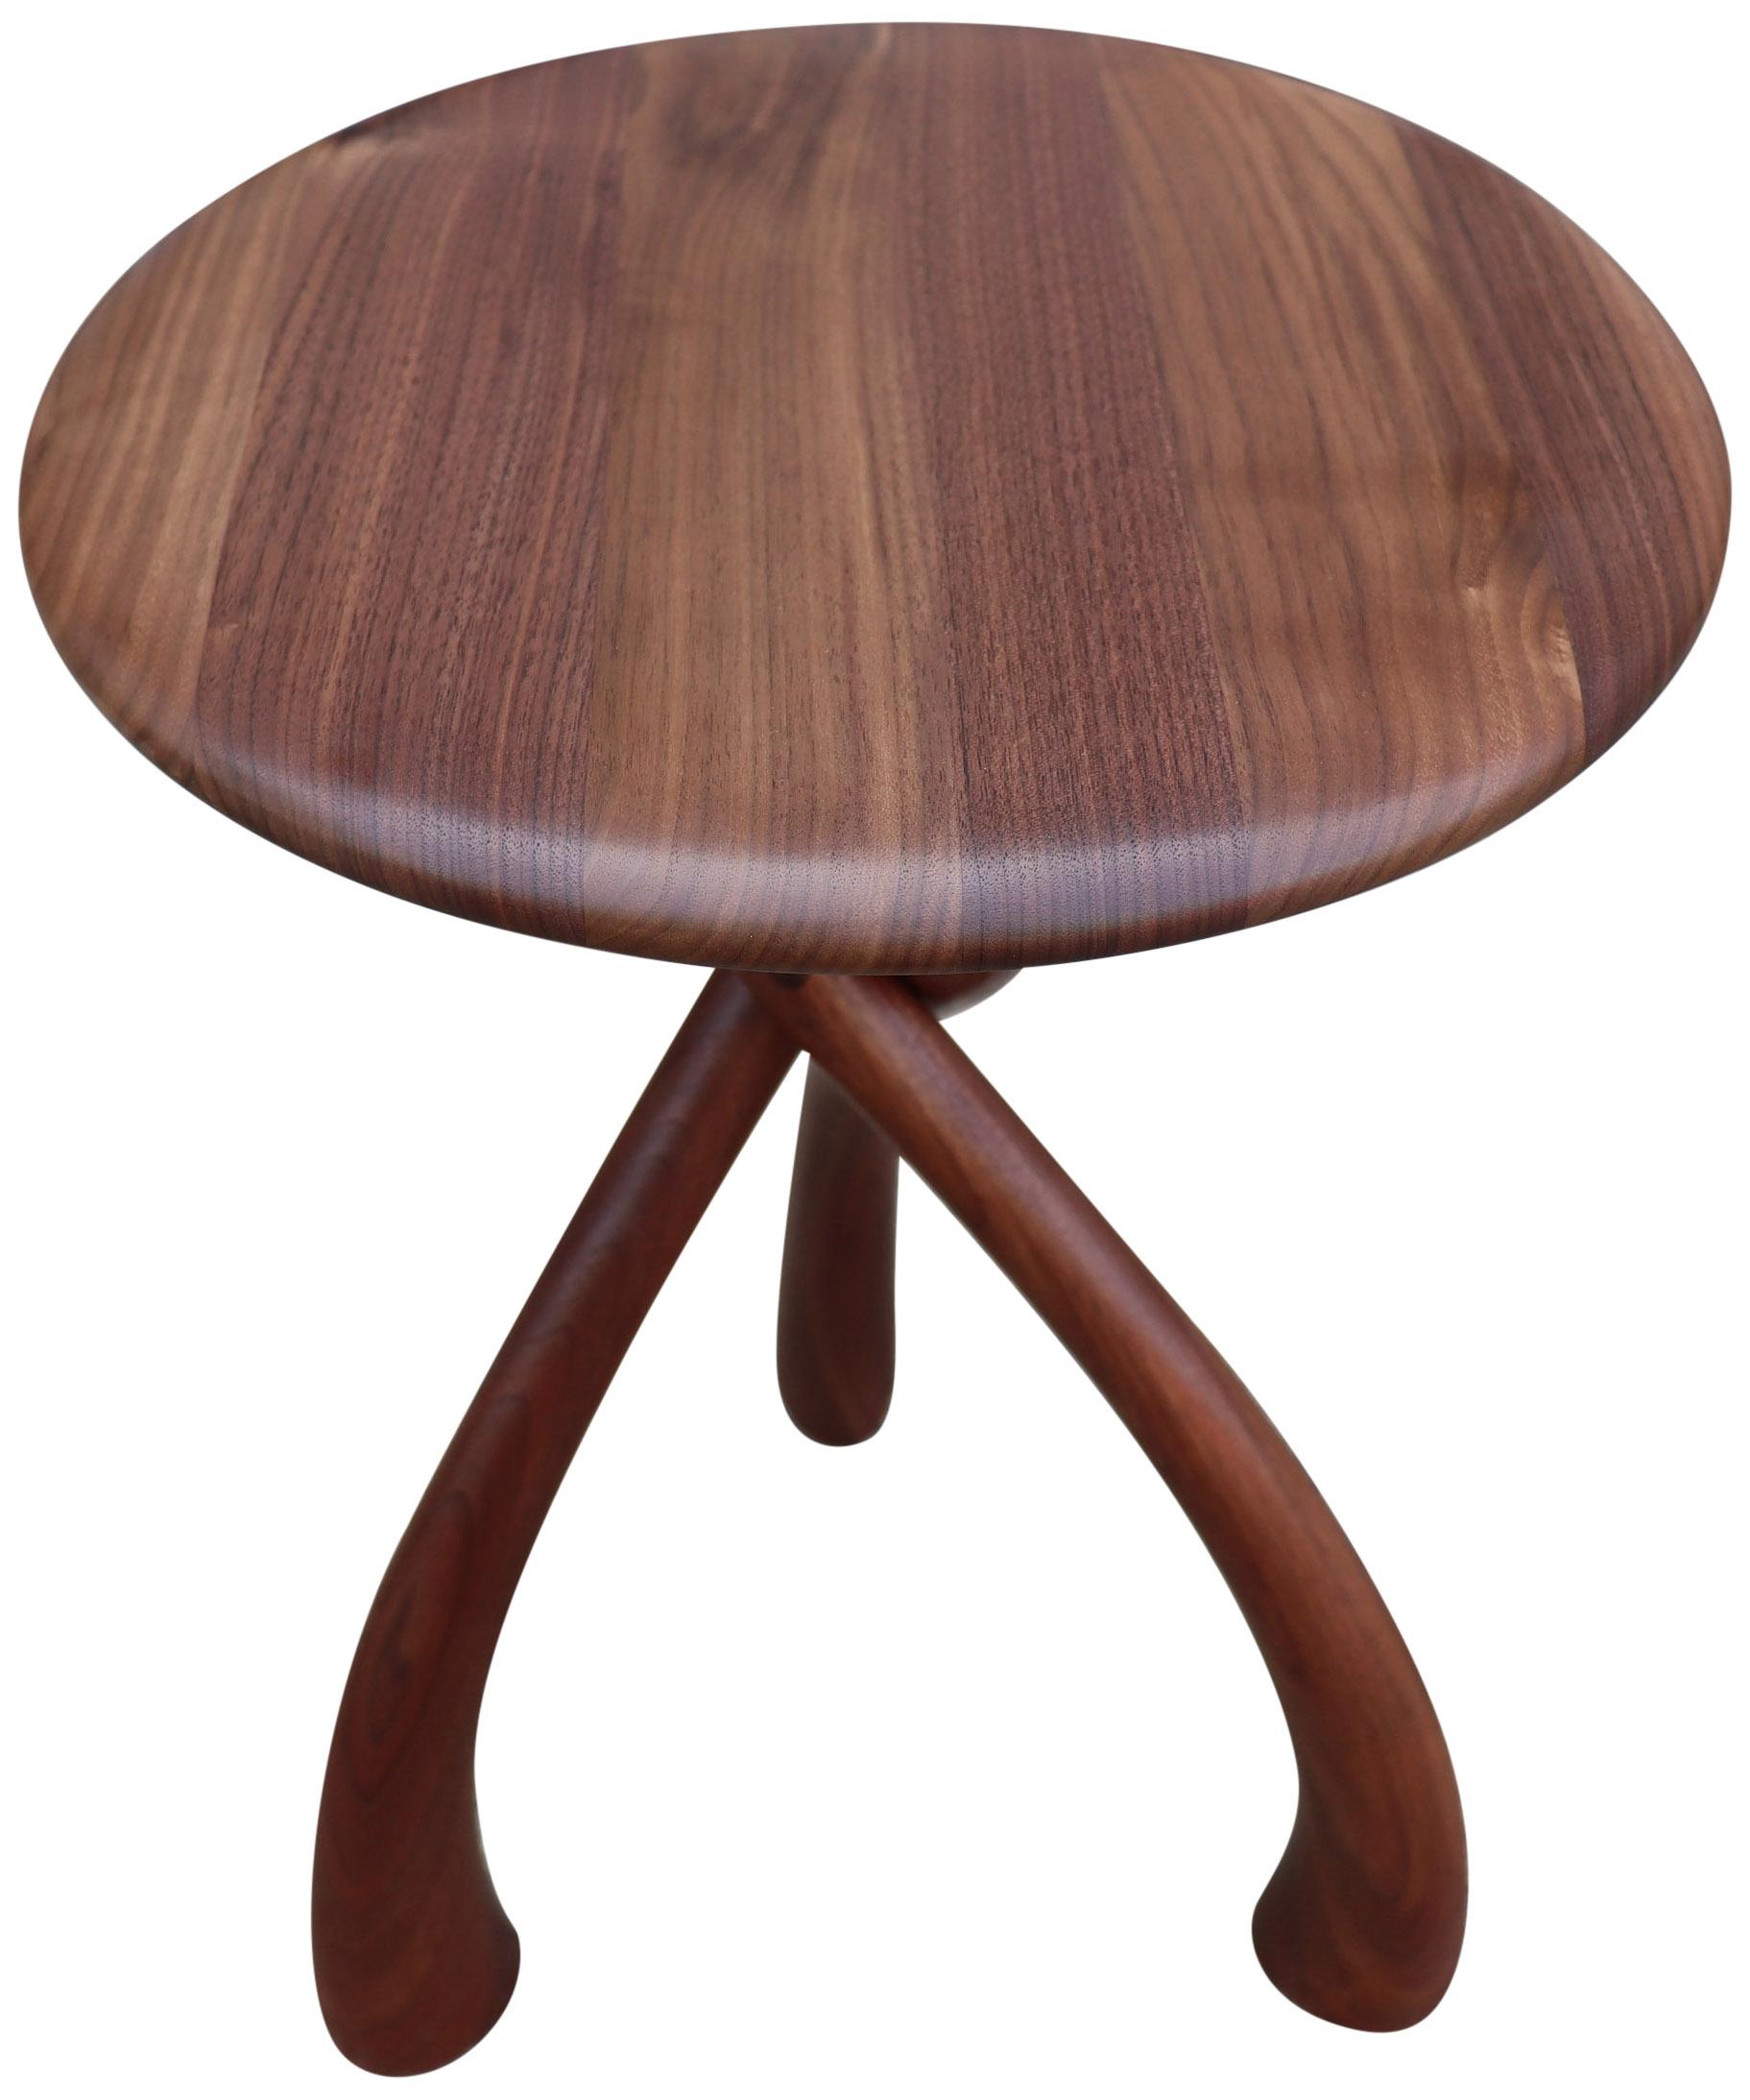 Midcentury Wishbone Side Table in Walnut (4 available) For Sale 1